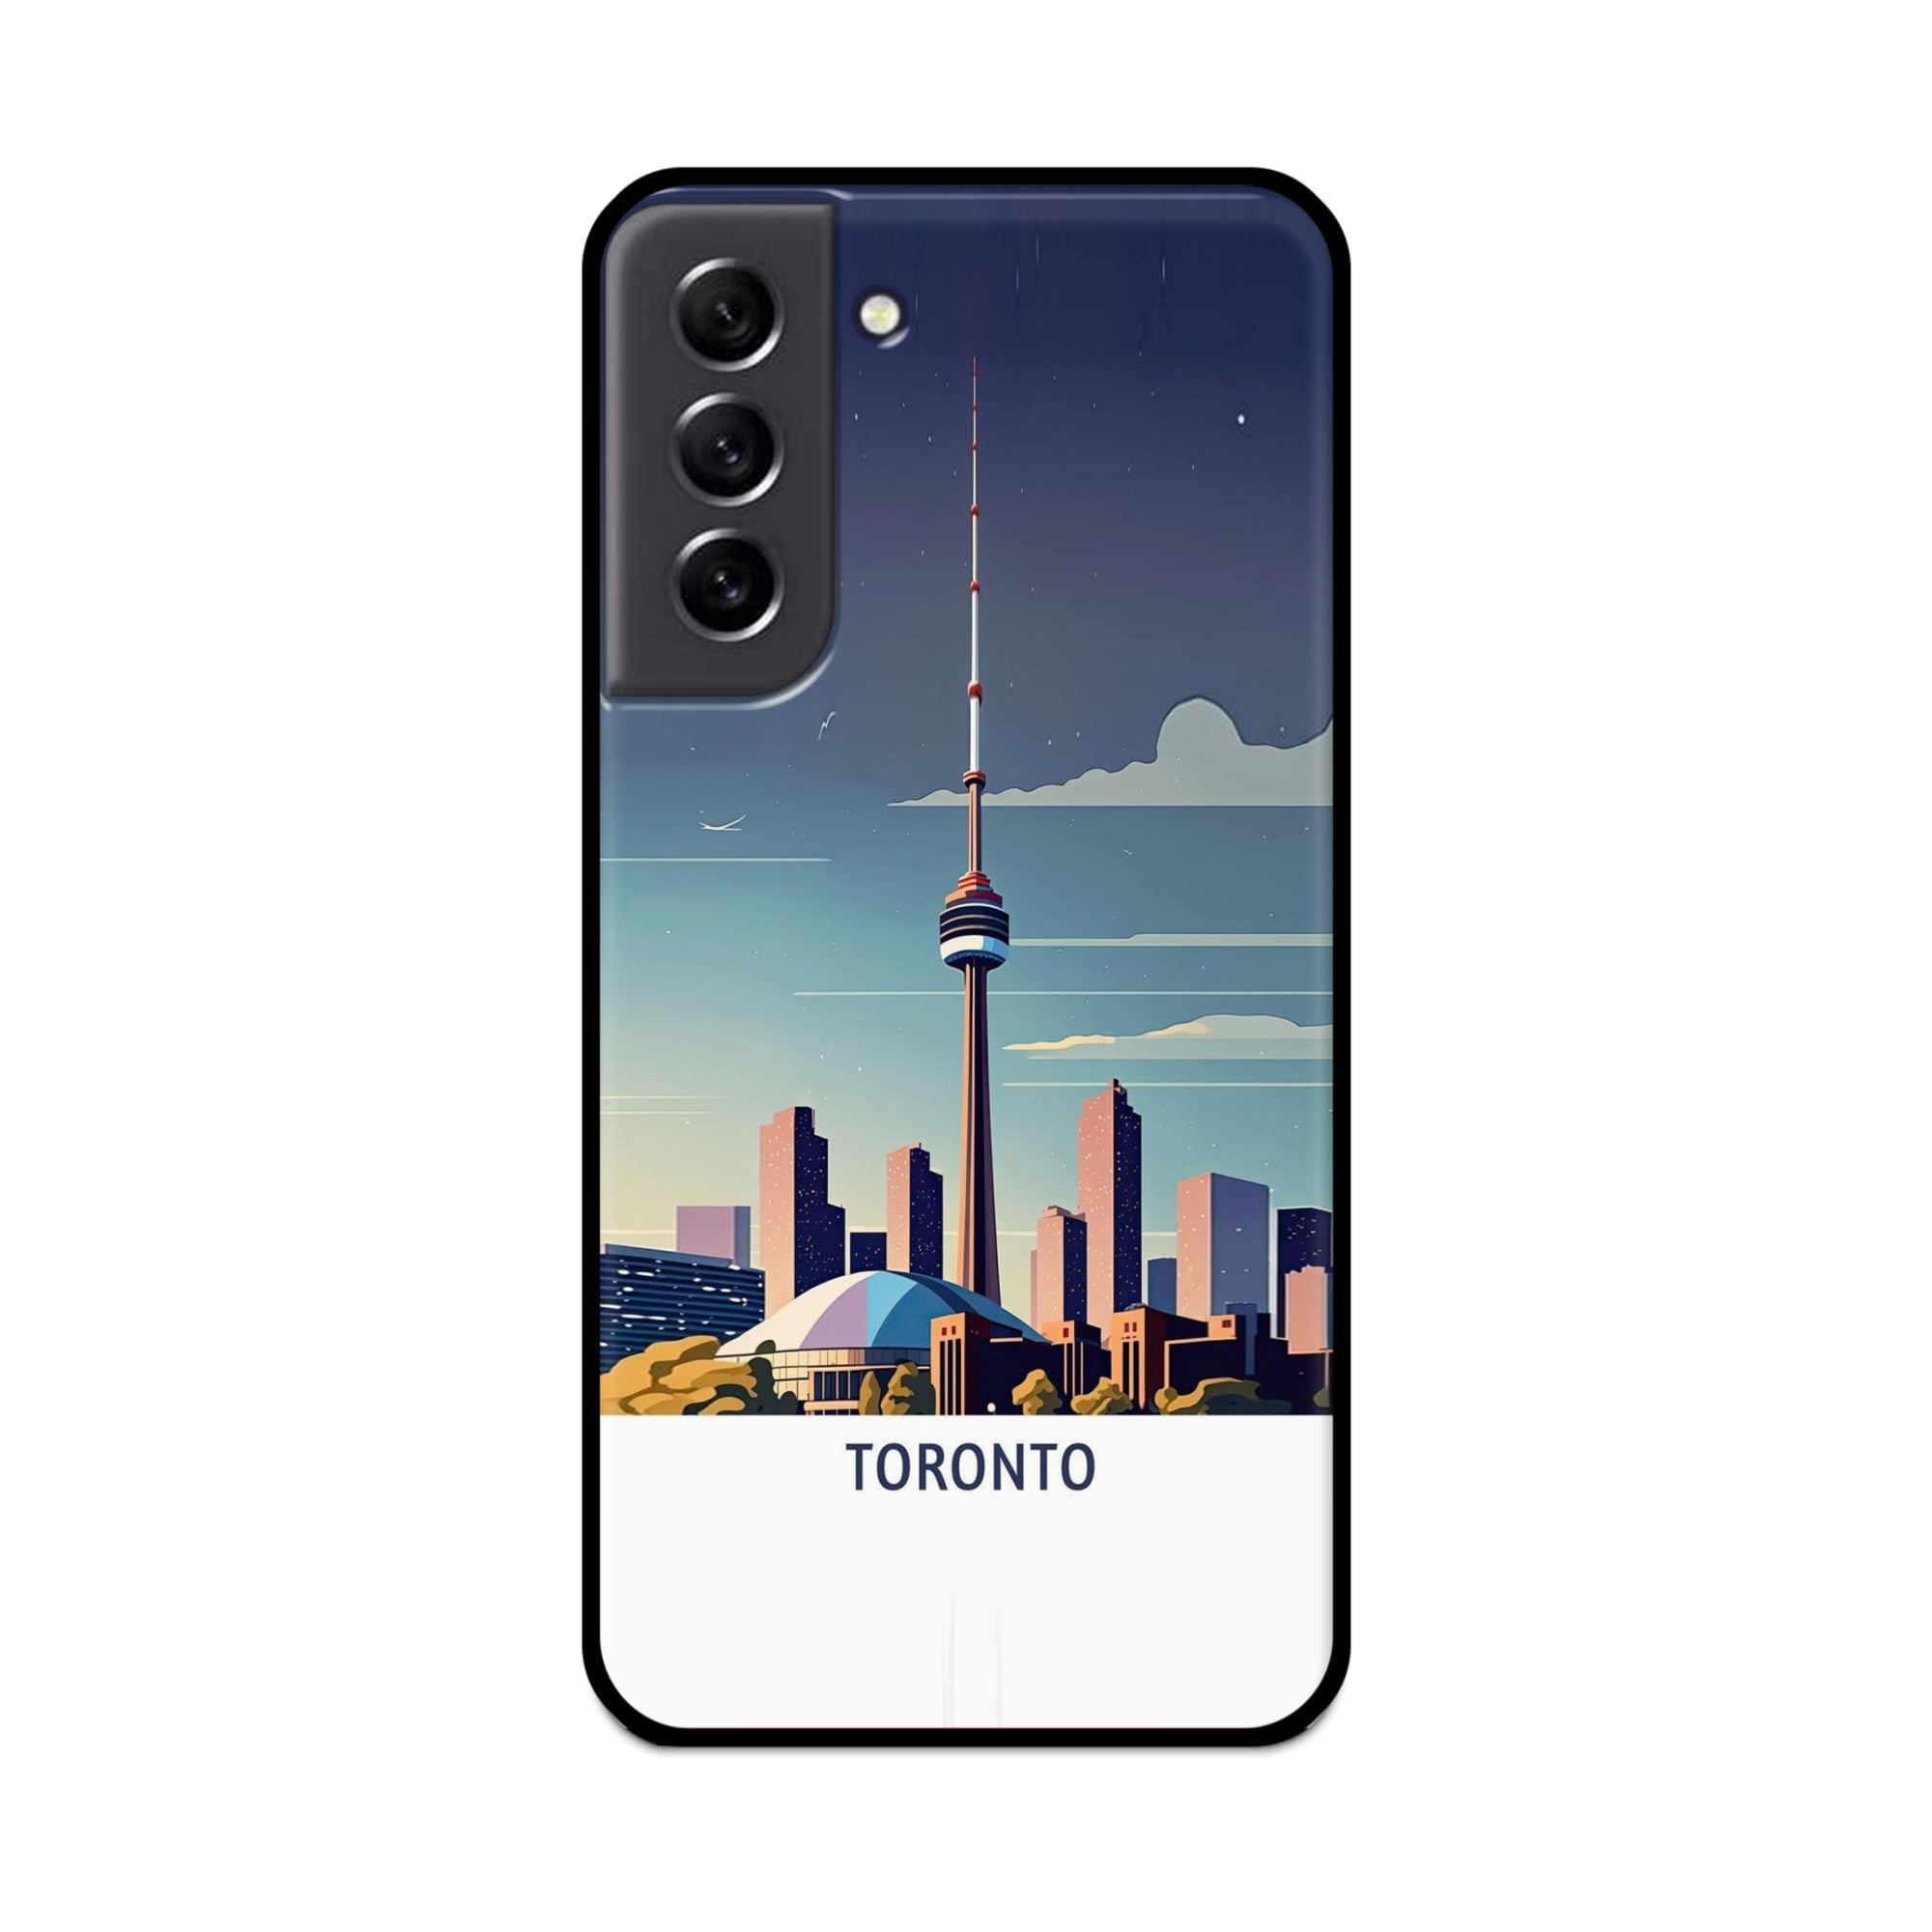 Buy Toronto Metal-Silicon Back Mobile Phone Case/Cover For Samsung S21 FE Online